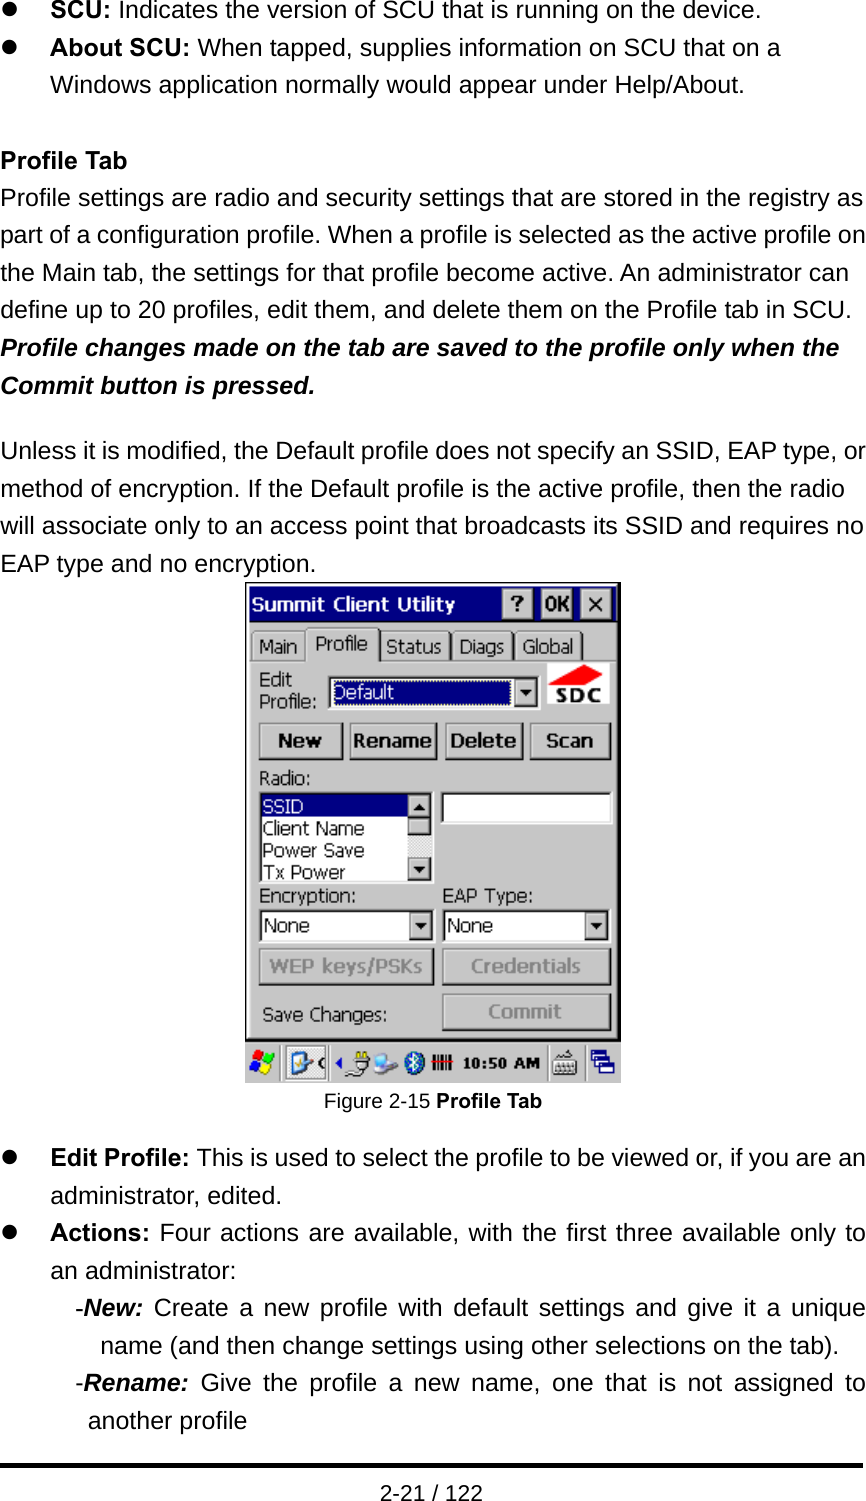  2-21 / 122 z SCU: Indicates the version of SCU that is running on the device. z About SCU: When tapped, supplies information on SCU that on a Windows application normally would appear under Help/About.  Profile Tab Profile settings are radio and security settings that are stored in the registry as part of a configuration profile. When a profile is selected as the active profile on the Main tab, the settings for that profile become active. An administrator can define up to 20 profiles, edit them, and delete them on the Profile tab in SCU. Profile changes made on the tab are saved to the profile only when the Commit button is pressed.  Unless it is modified, the Default profile does not specify an SSID, EAP type, or method of encryption. If the Default profile is the active profile, then the radio will associate only to an access point that broadcasts its SSID and requires no EAP type and no encryption.  Figure 2-15 Profile Tab  z Edit Profile: This is used to select the profile to be viewed or, if you are an administrator, edited.   z Actions: Four actions are available, with the first three available only to an administrator: -New: Create a new profile with default settings and give it a unique name (and then change settings using other selections on the tab). -Rename: Give the profile a new name, one that is not assigned to another profile 